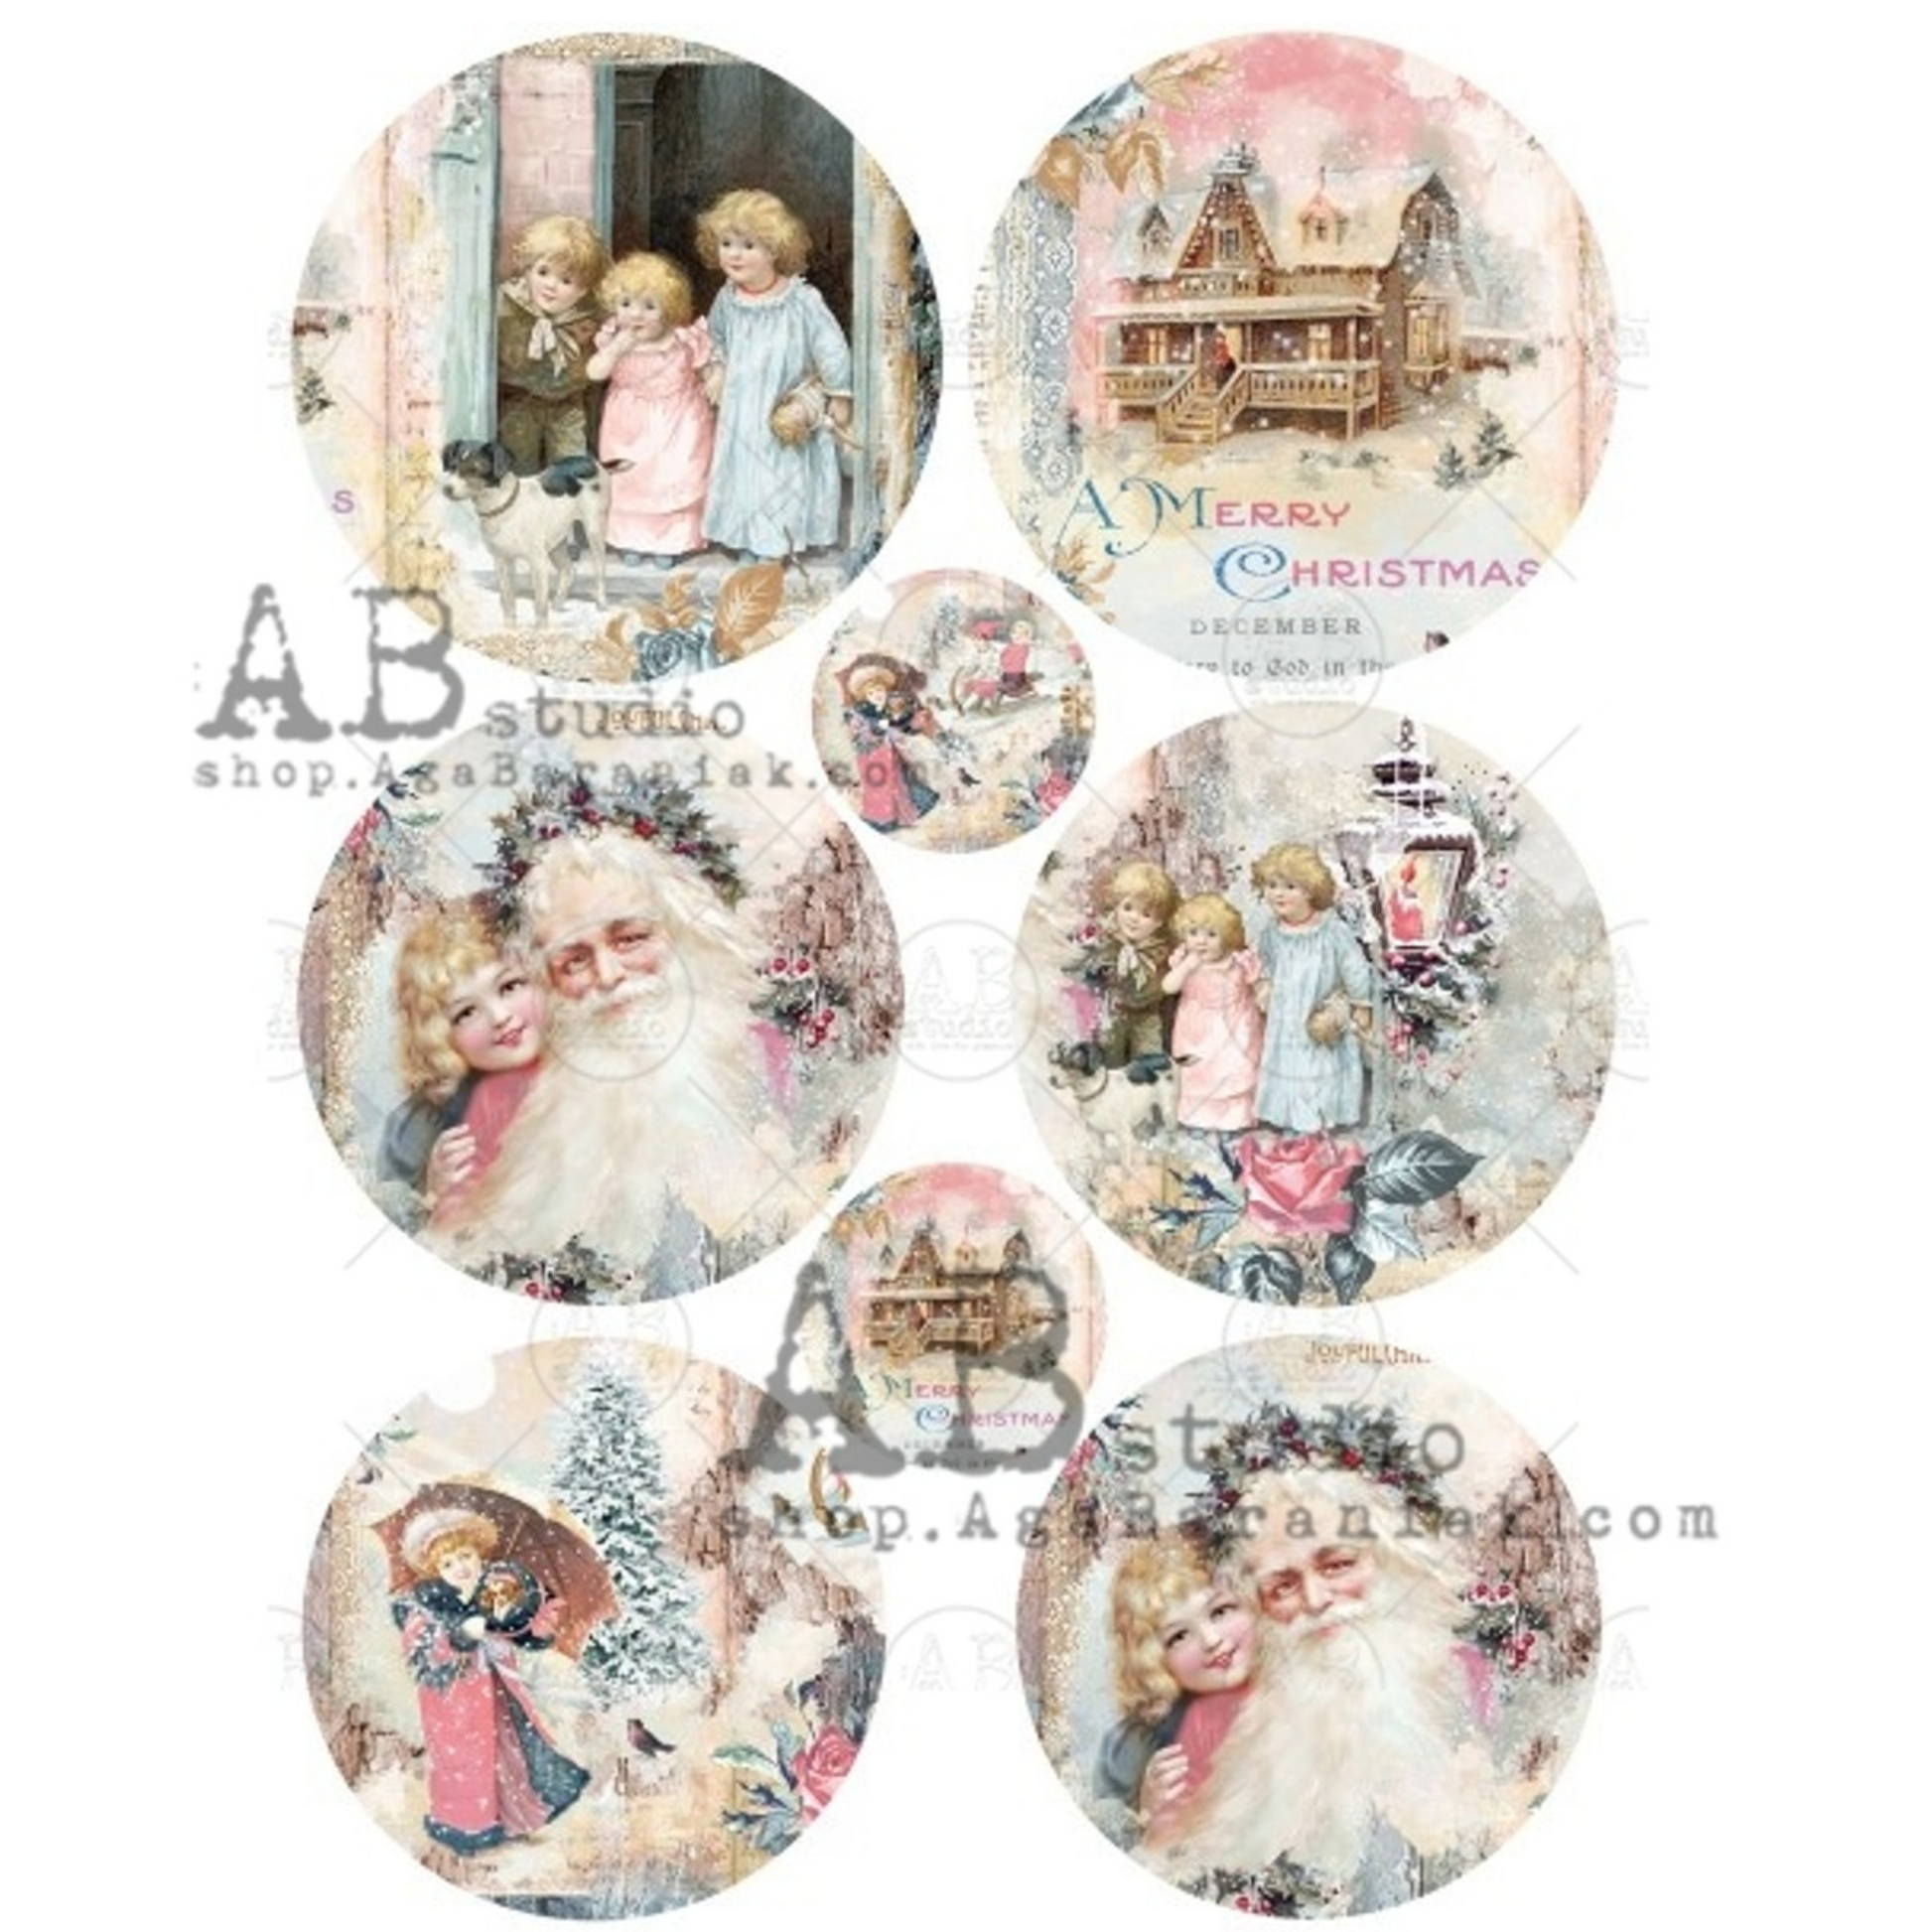 "Joyful Children and Santa Round Scenes" decoupage rice paper by AB Studio available in size A4 at Milton's Daughter.